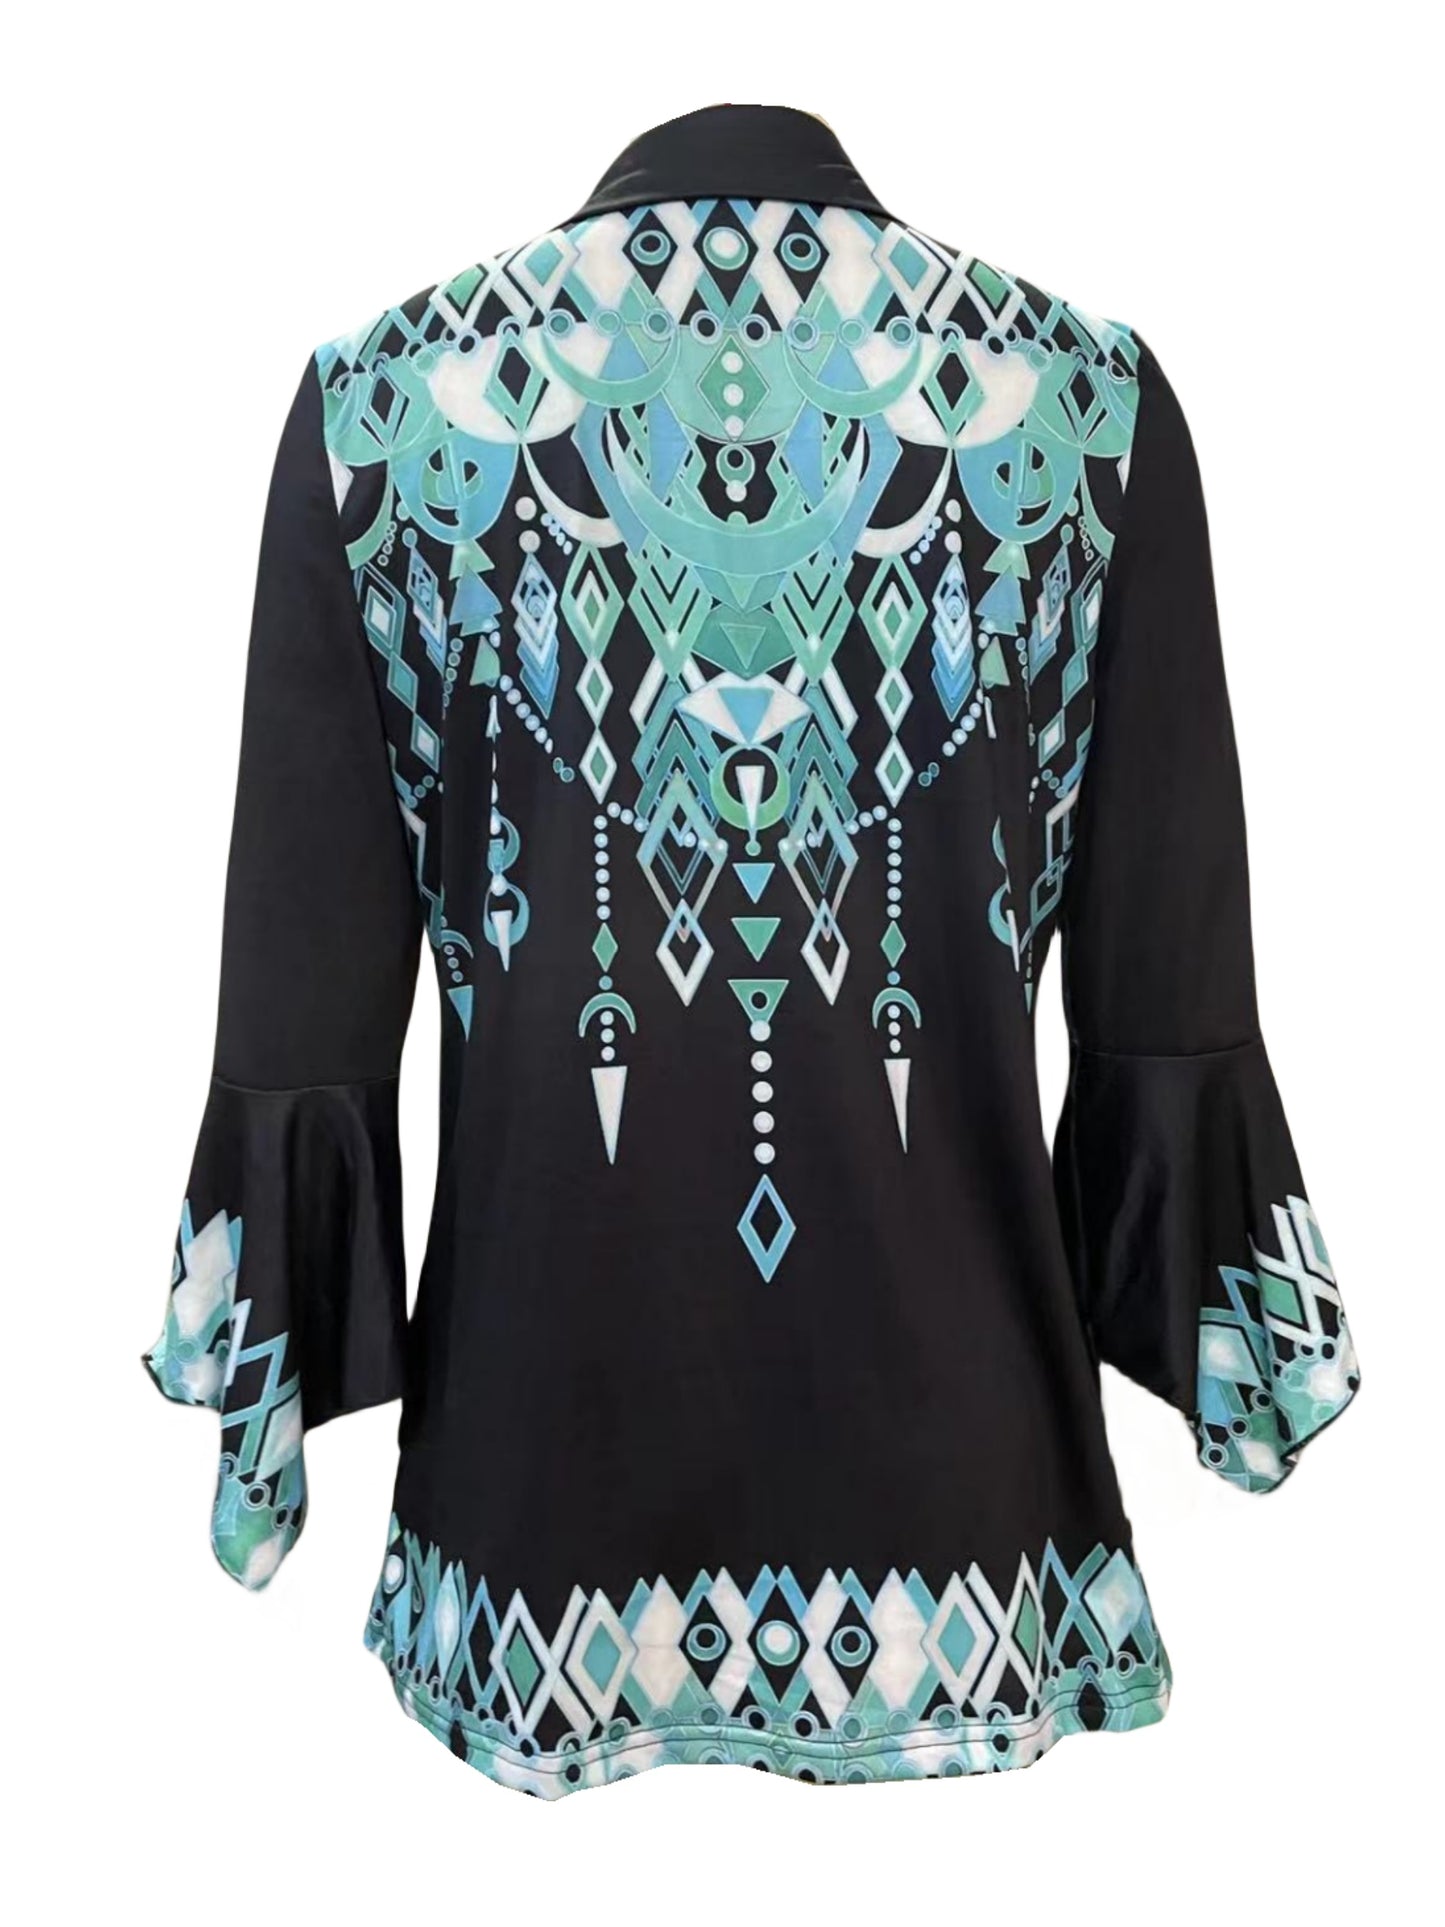 Geometric Print Collared T-Shirt, Casual Irregular Cuff Top For Spring & Fall, Women's Clothing